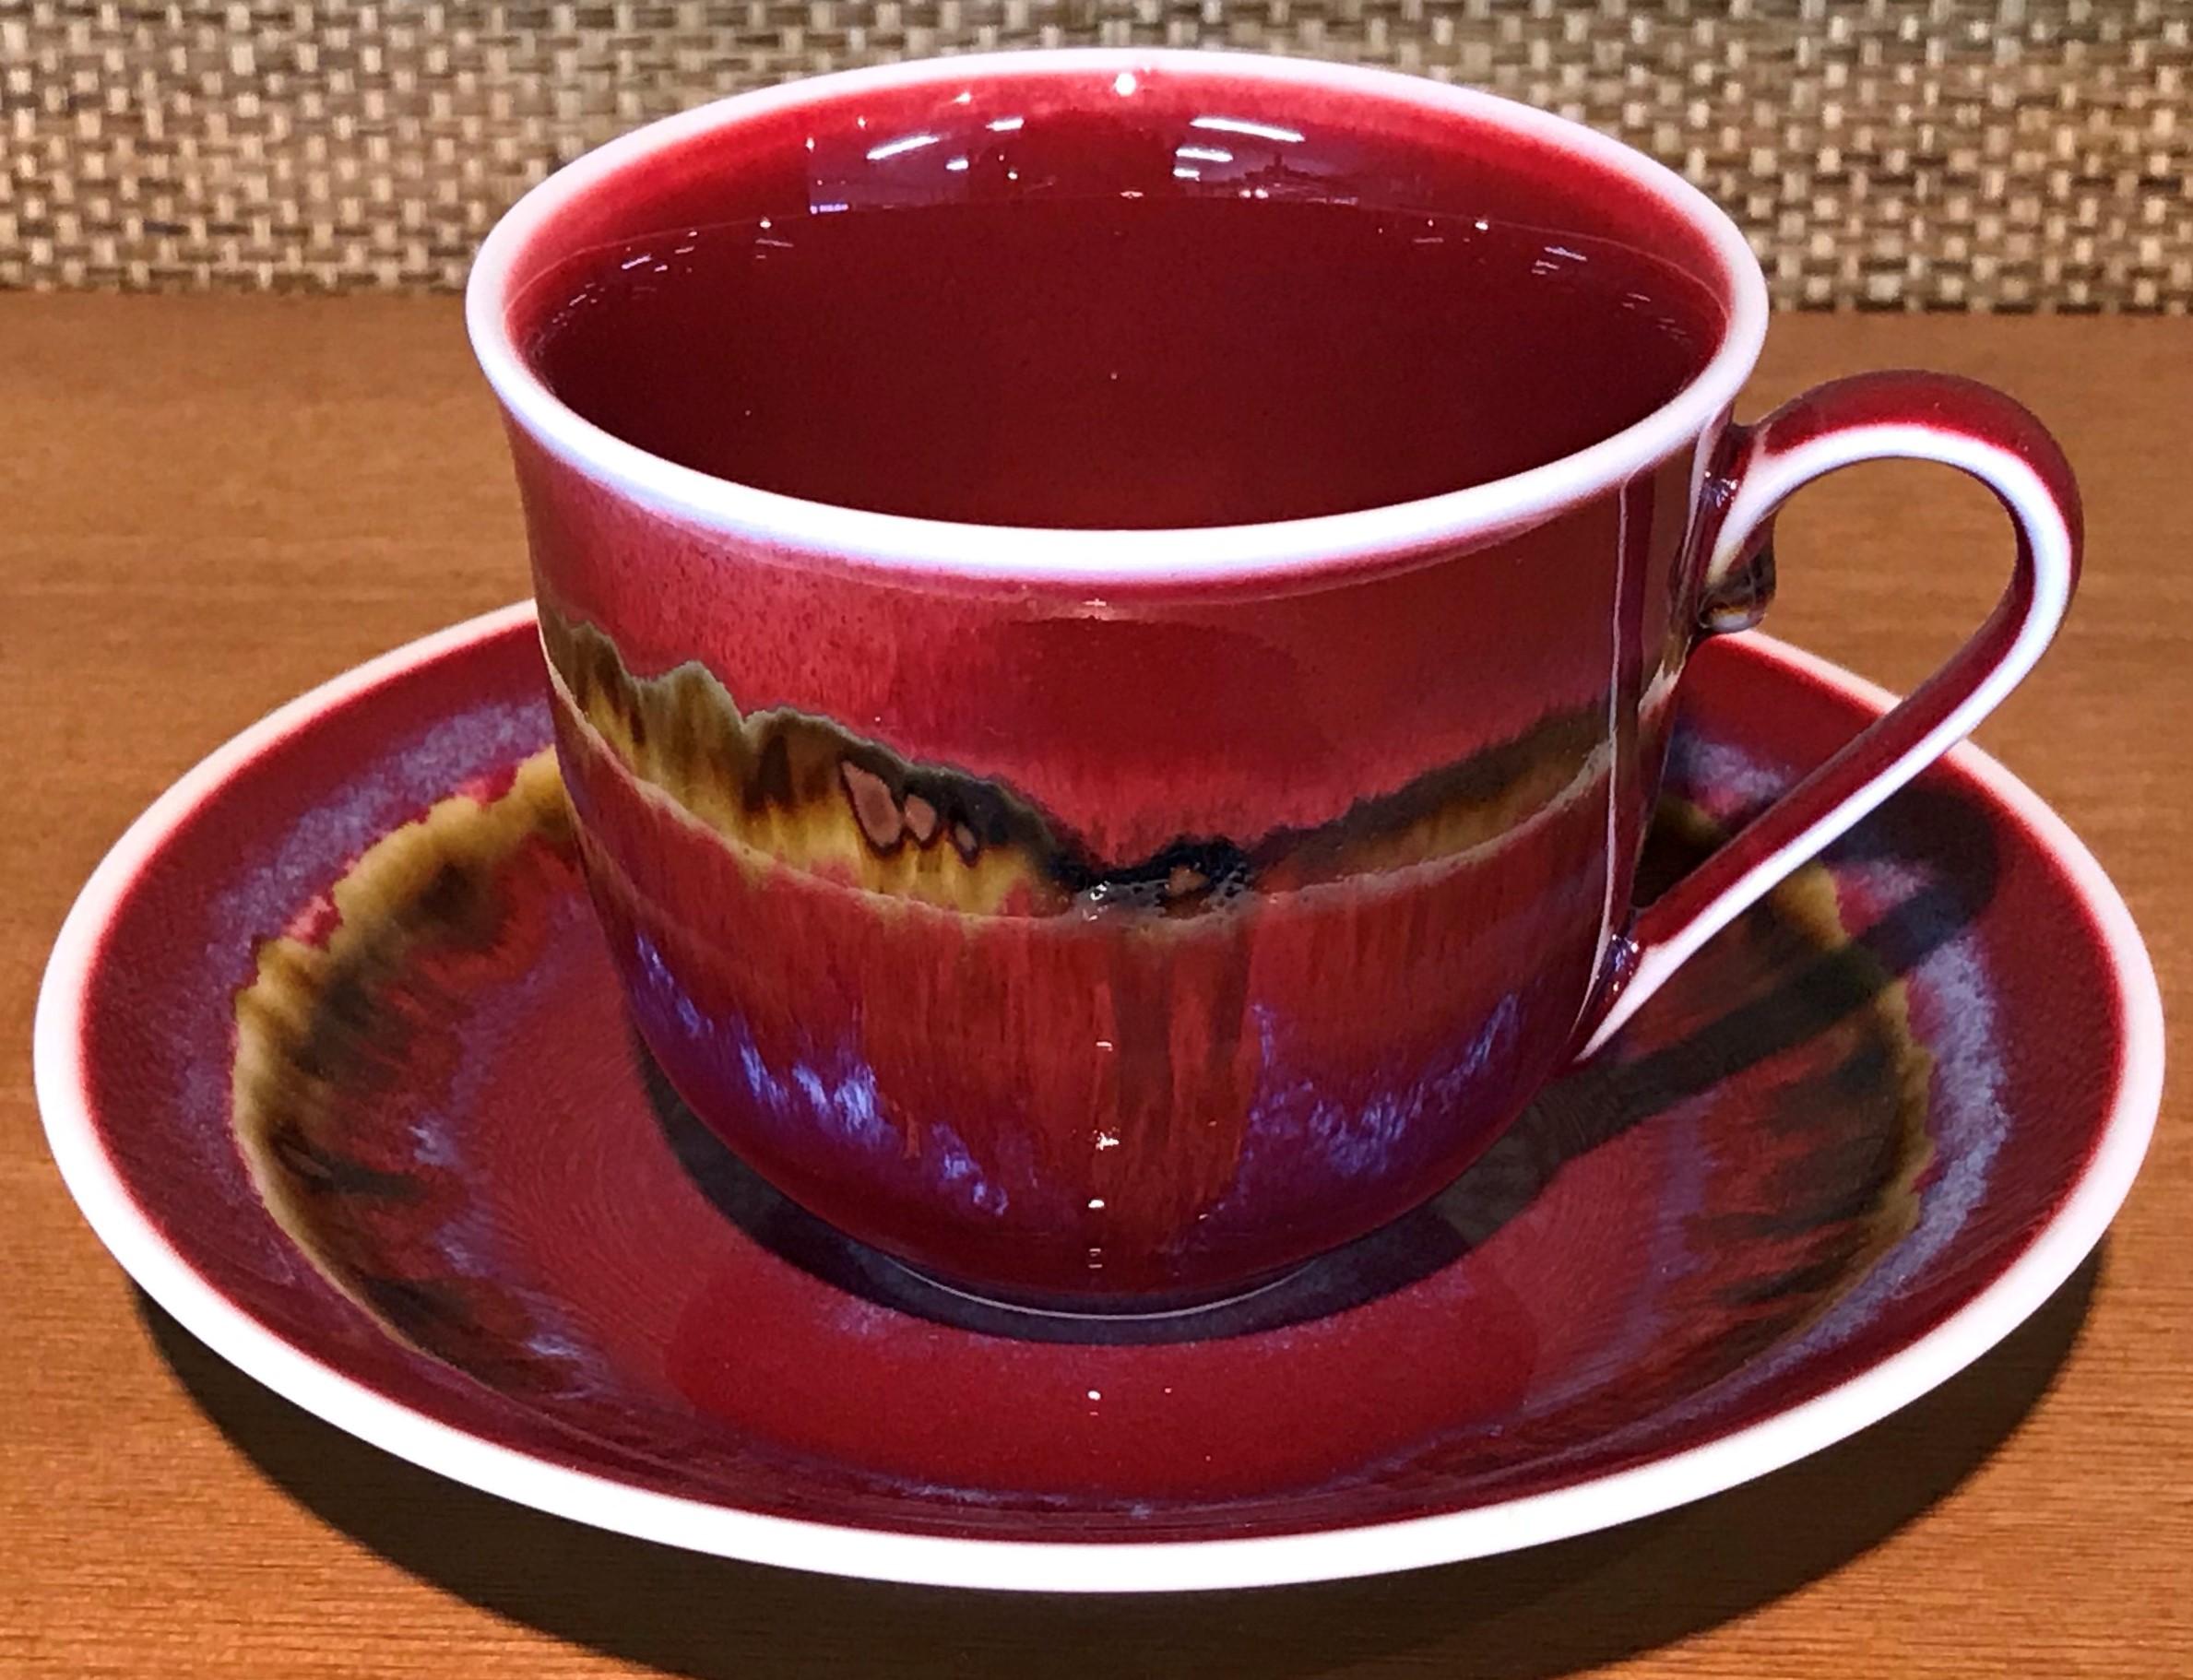 Contemporary Japanese Hand-Glazed Red Blue Porcelain Cup and Saucer by Master Artist, 2018